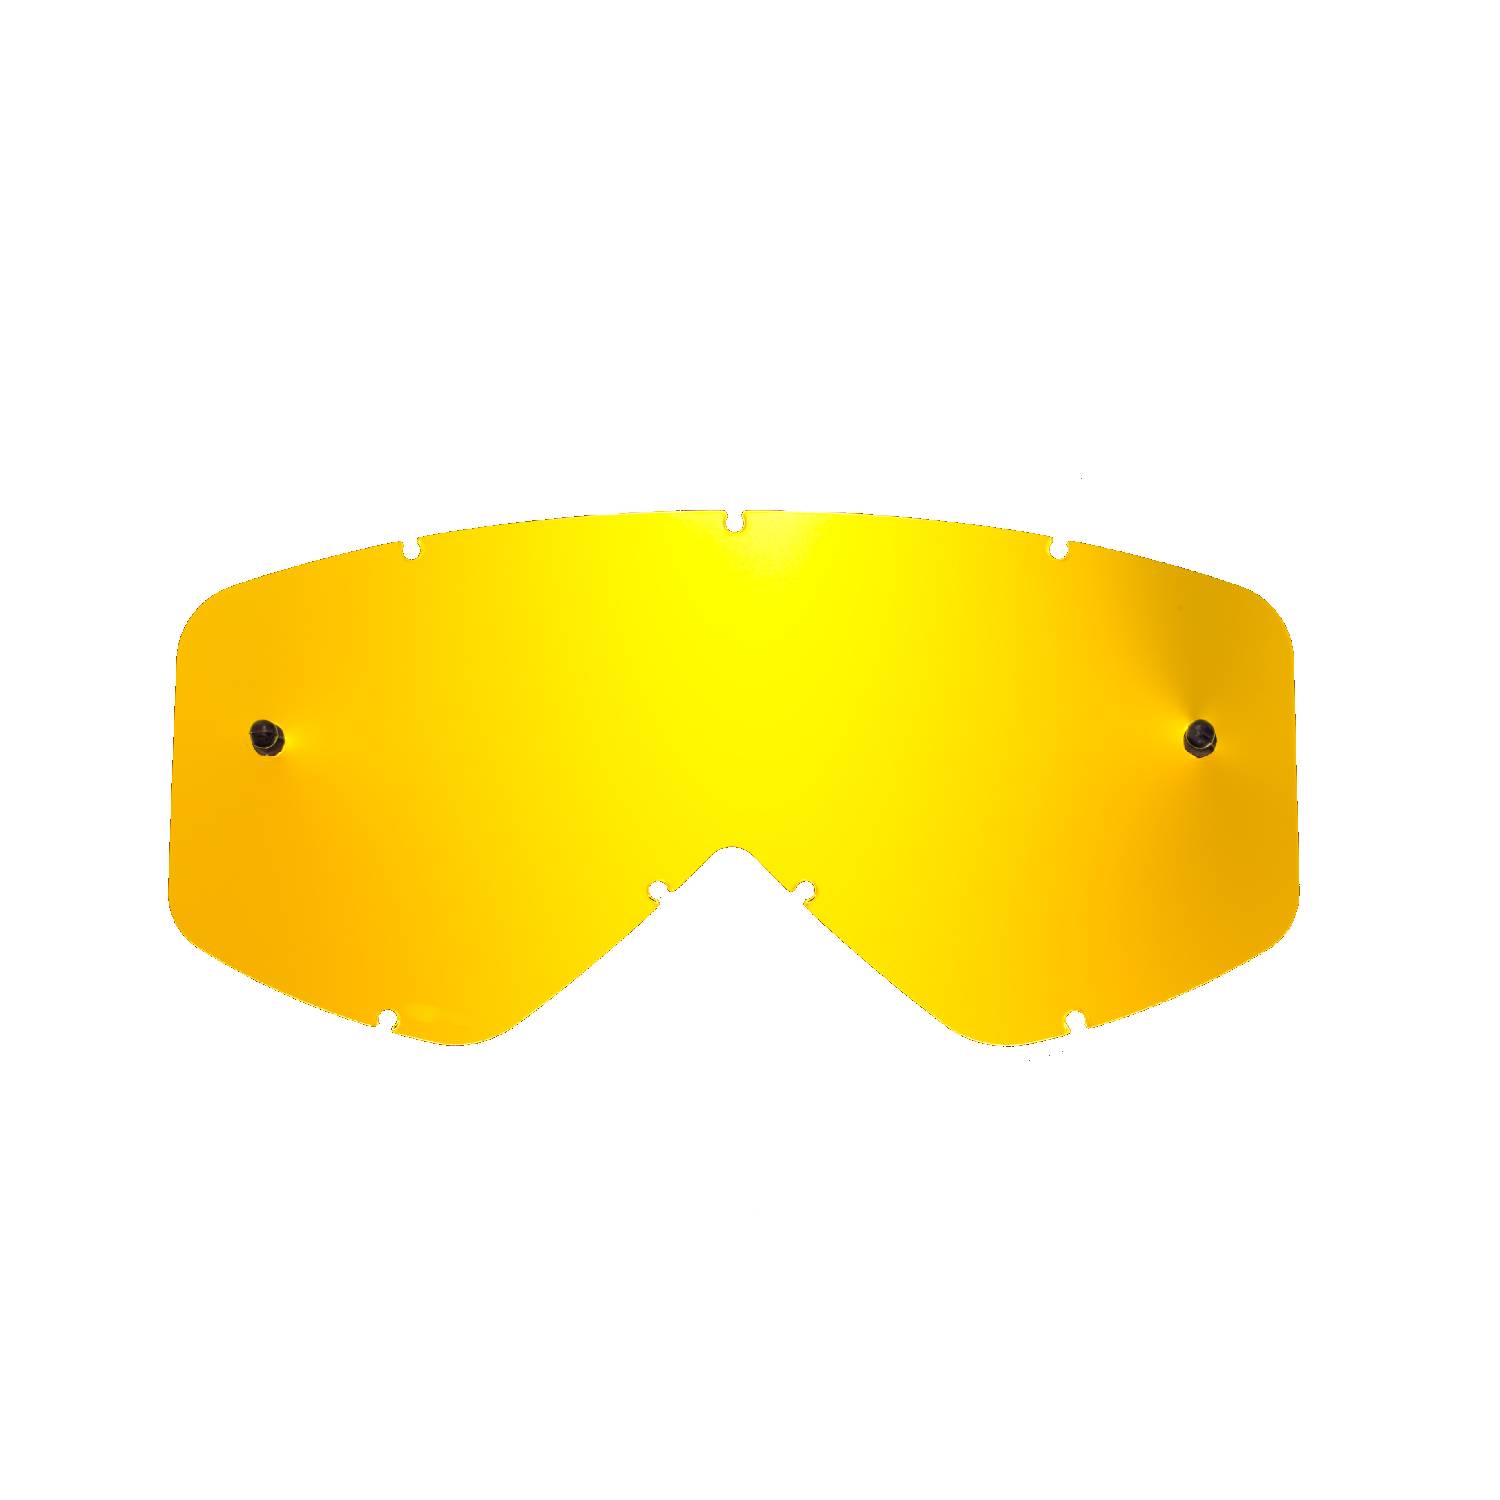 gold-toned mirrored replacement lenses for goggles compatible for Smith Fuel / Intake / V1 / V2 goggle